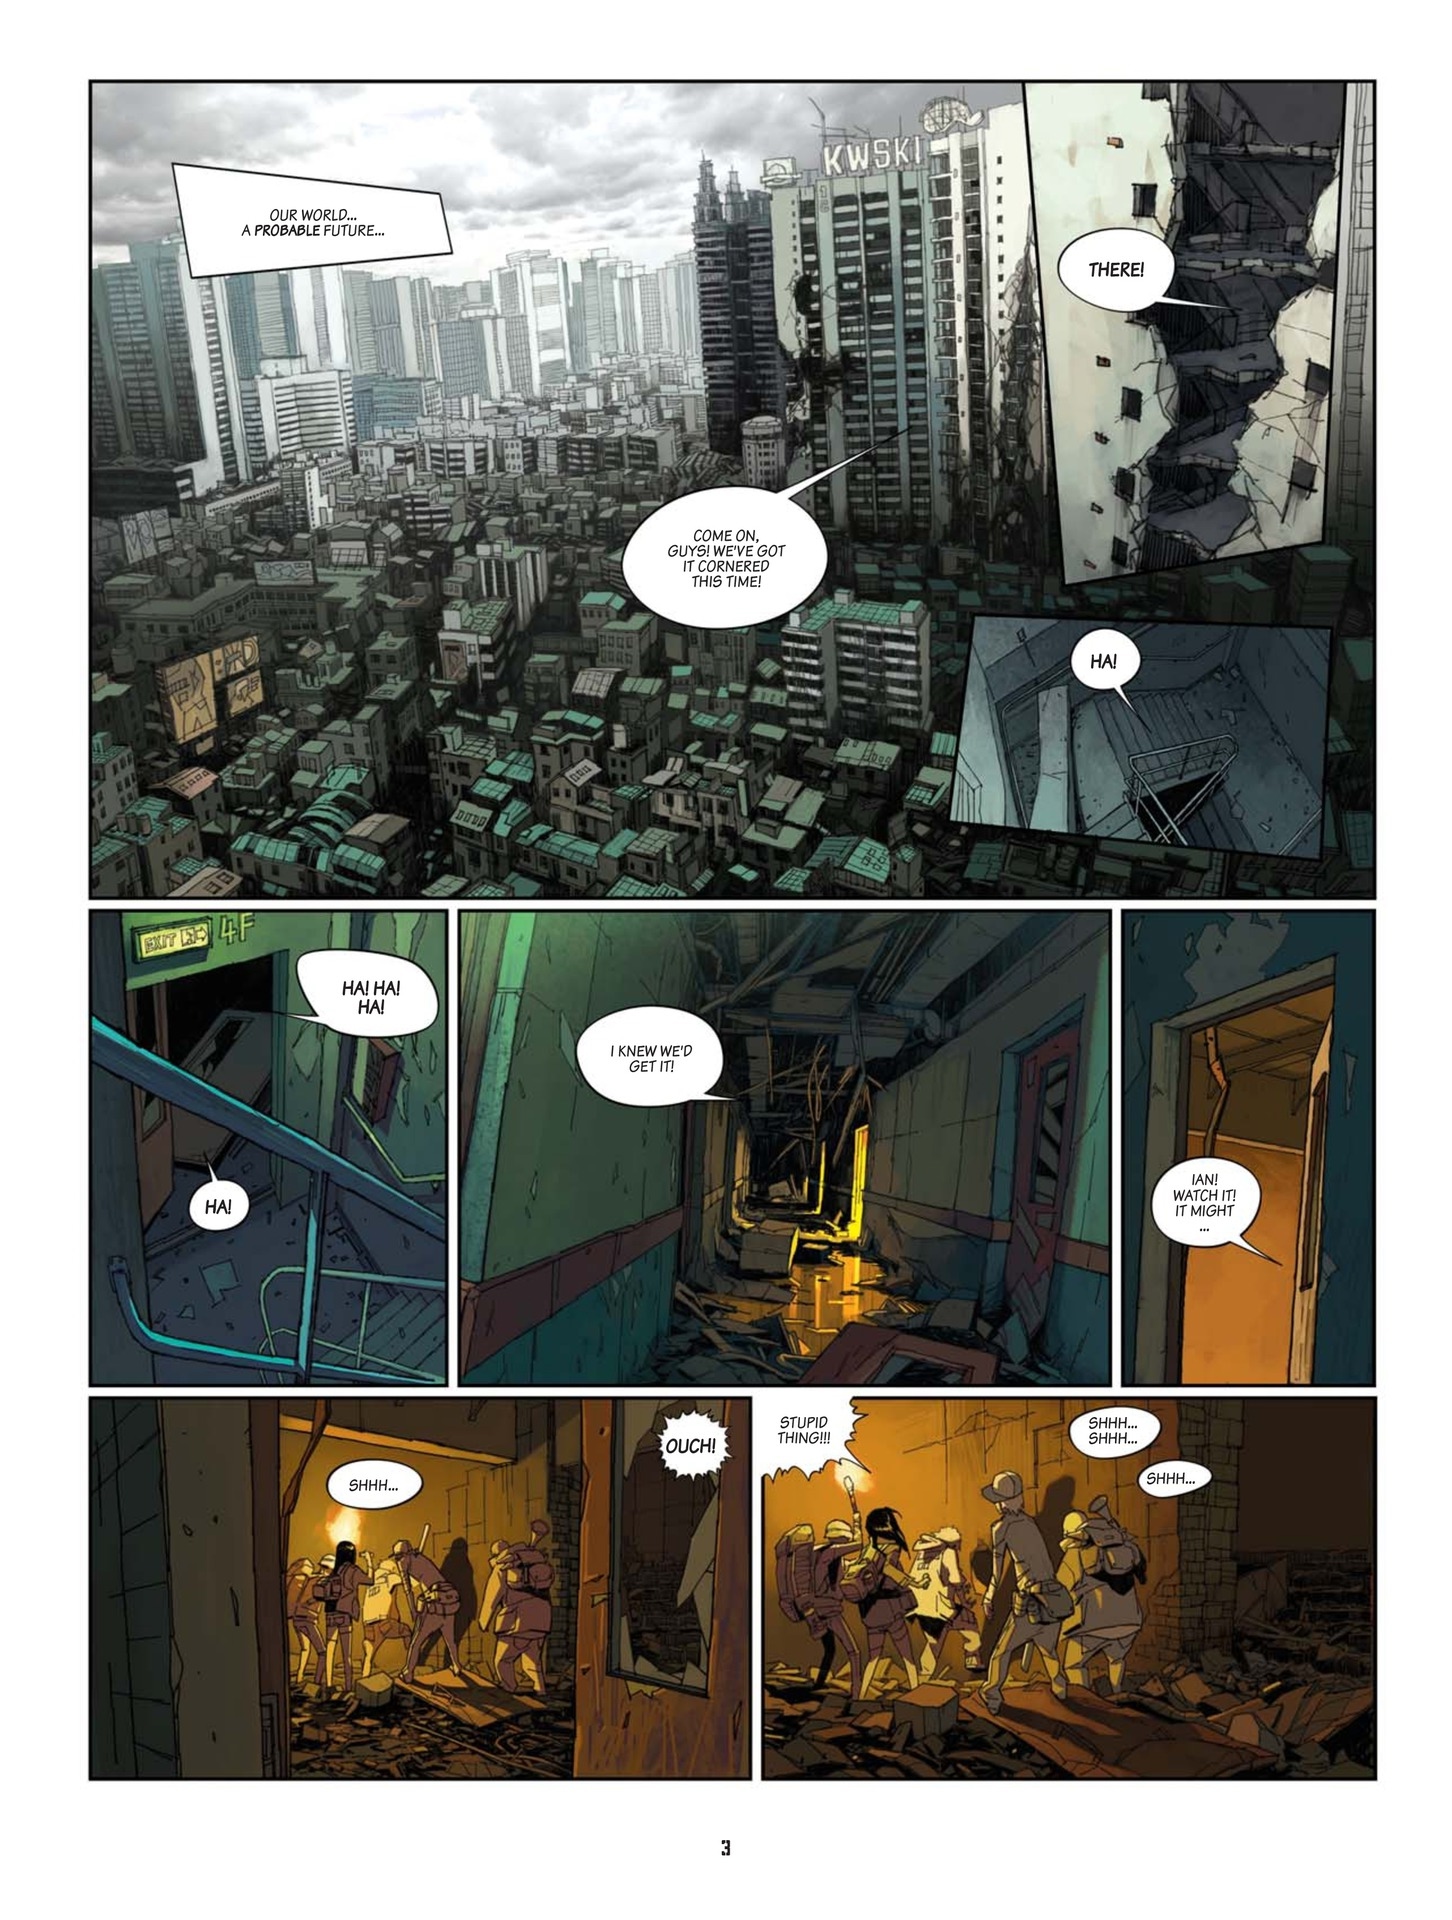 SAM (2014-): Chapter 2 - Page 5